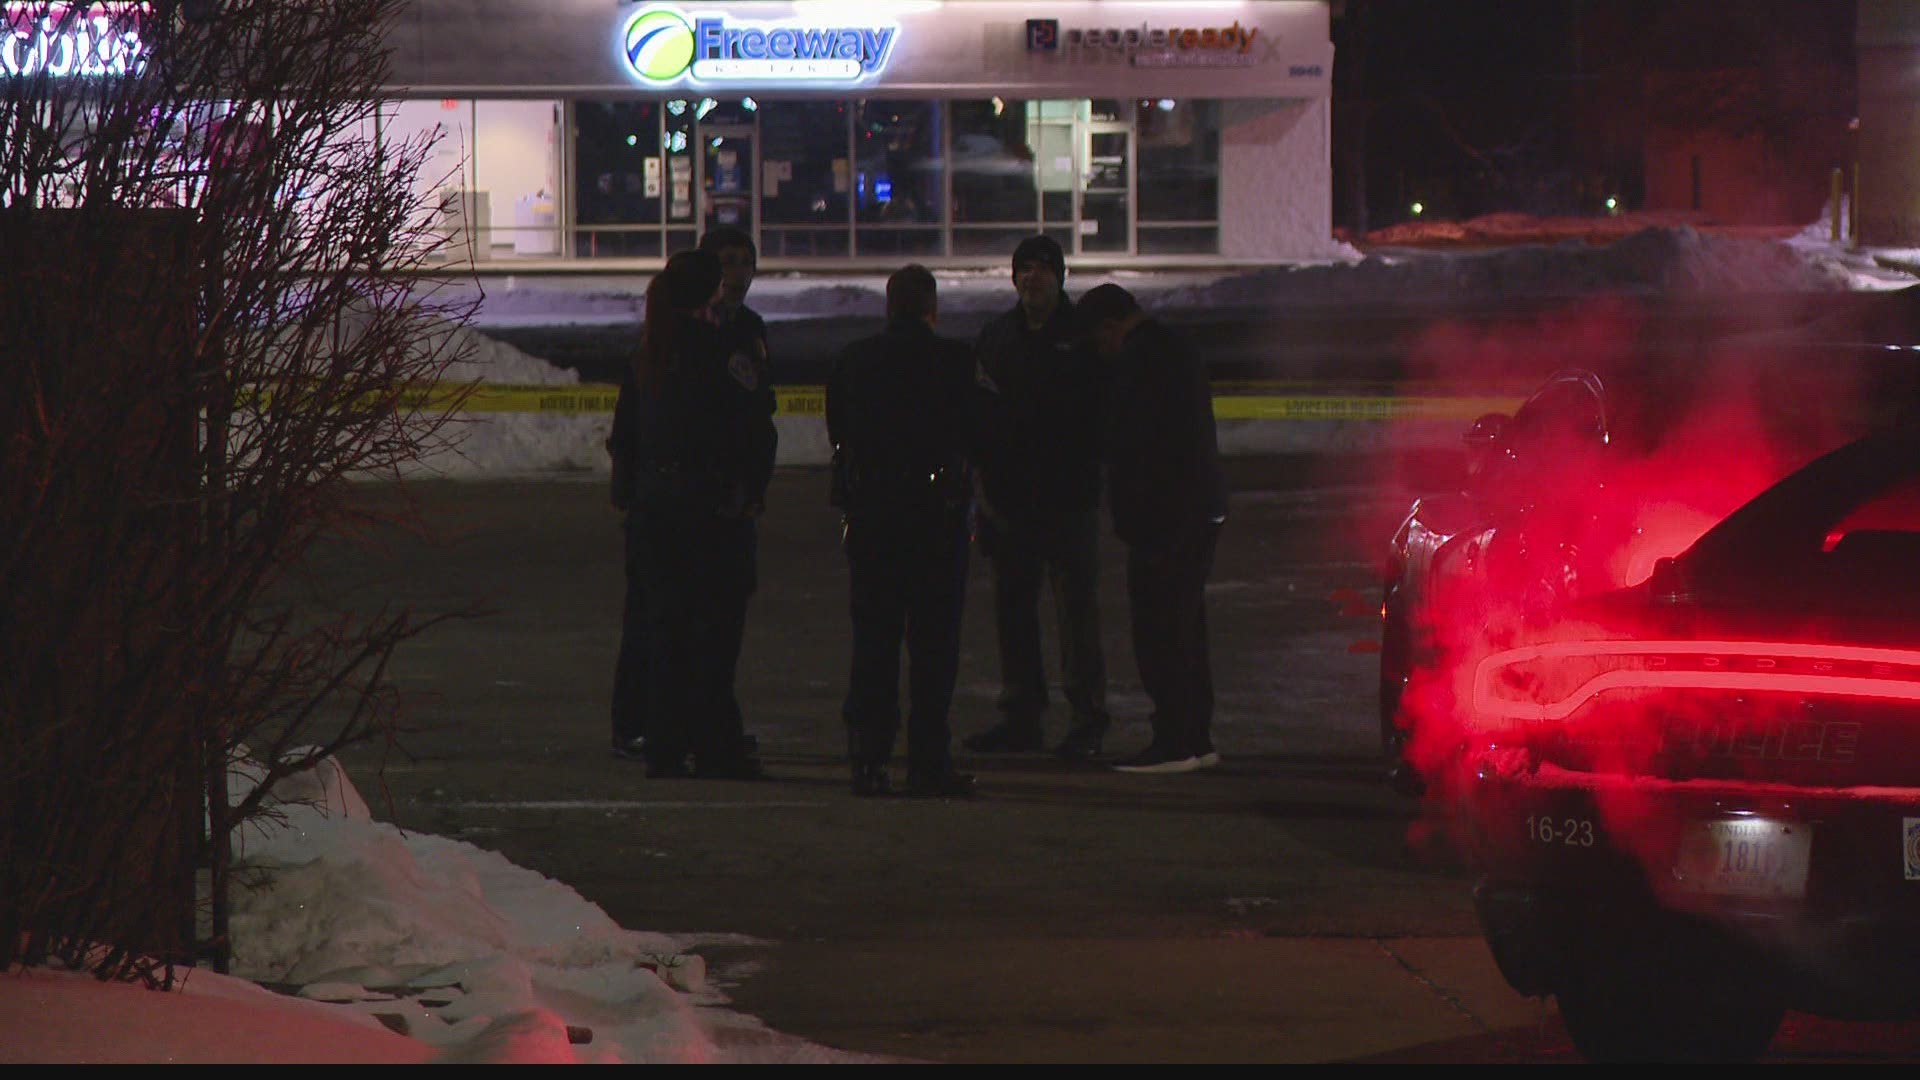 Police found a person who appeared to be shot around 4 a.m. Friday.